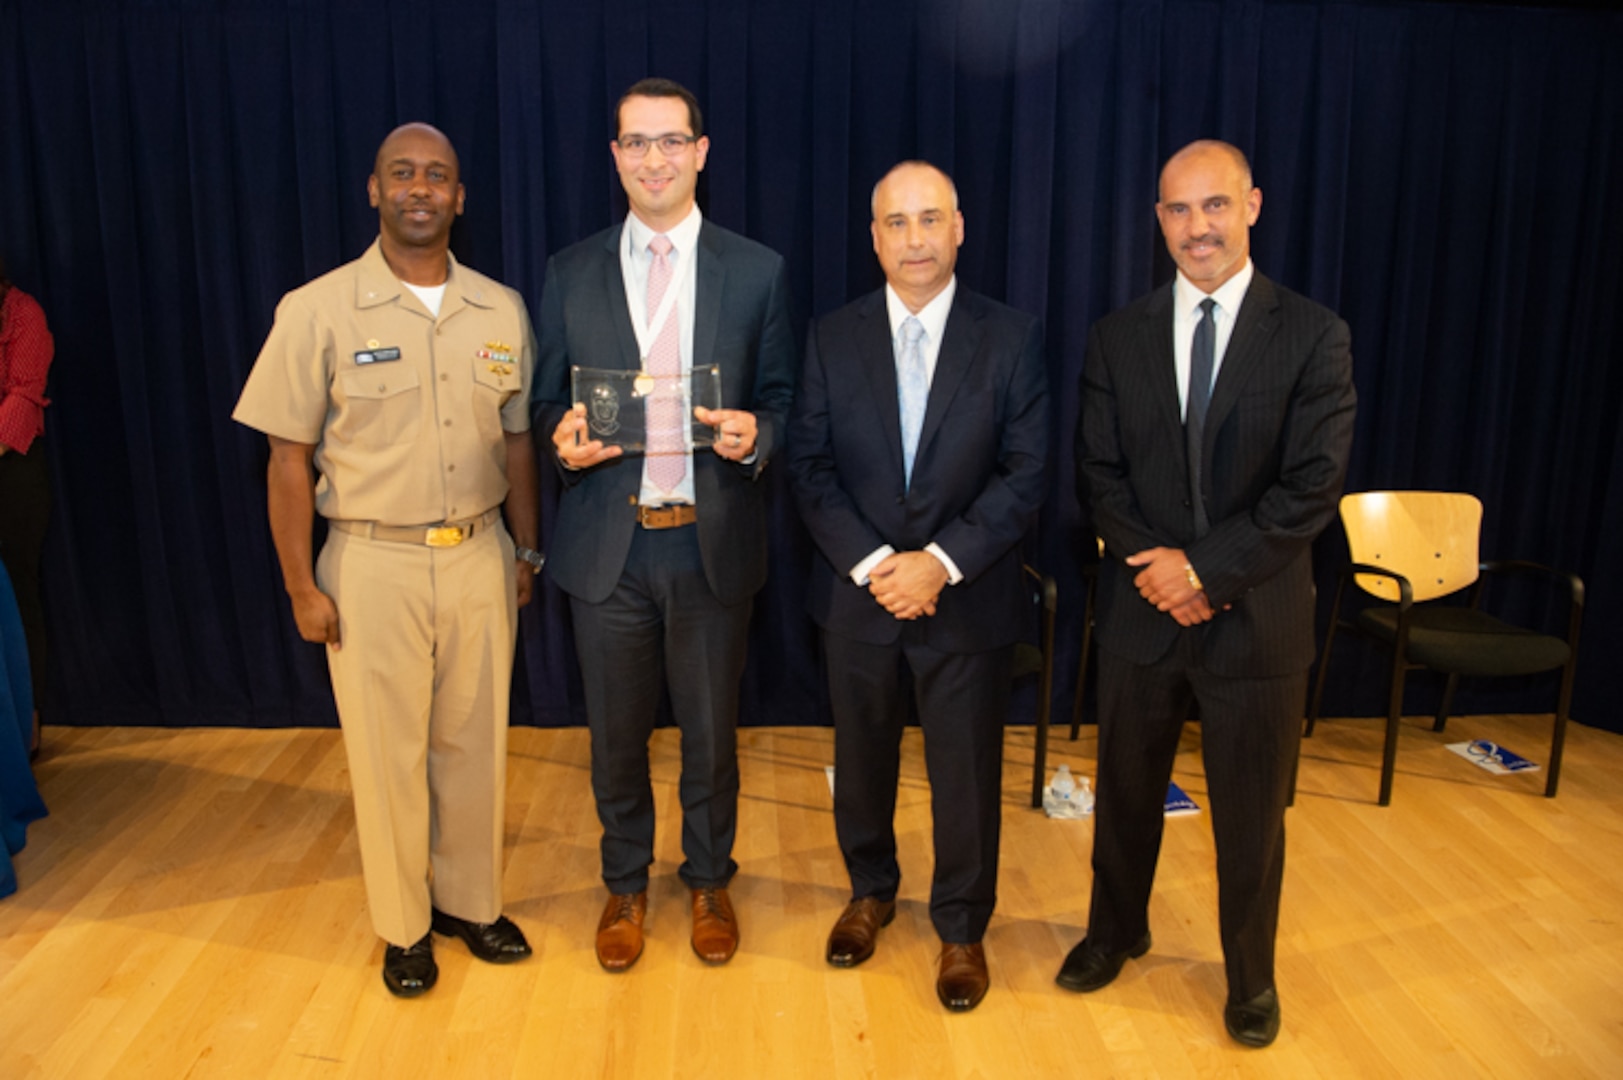 Michael Peduto, Contracts Division head, receives the Rear Adm. Grace Hopper Award the Naval Surface Warfare Center, Carderock Division Honor Awards on Sept. 10, 2019, in West Bethesda, Md. With Peduto is Commanding Officer Capt. Cedric McNeal, Technical Director Larry Tarasek and Contracting and Acquisition Department Head Tariq Al-Agba. (U.S. Navy photo by Nicholas Brezzell/Released)